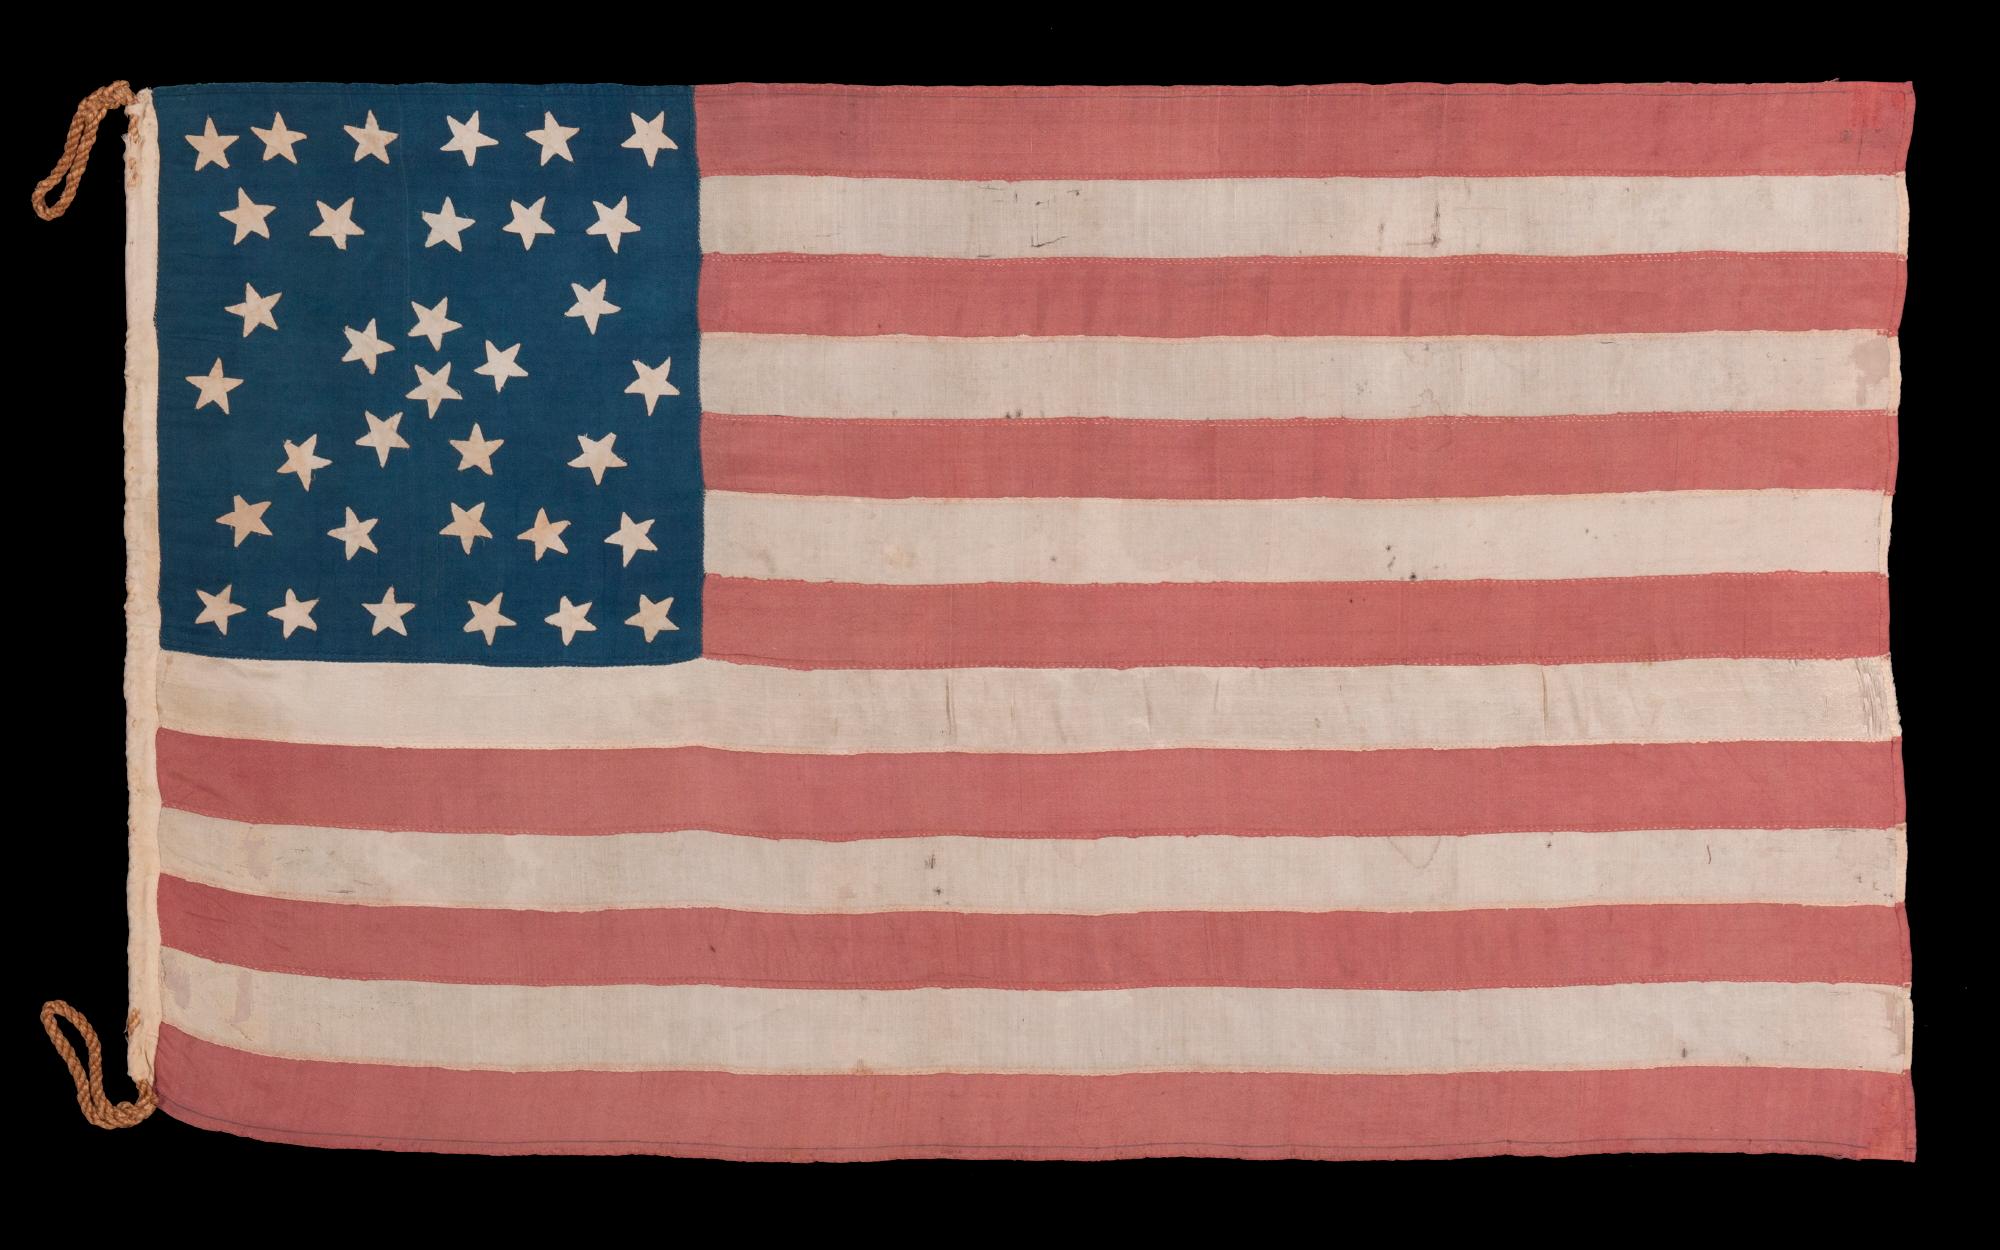 EXTRAORDINARY 34 STAR ANTIQUE AMERICAN FLAG WITH AN ACCORDION OR HOURGLASS MEDALLION CONFIGURATION THAT SURROUNDS A PENTAGON OF STARS IN THE CENTER; MADE OF FINE SILK AND ENTIRELY HAND-SEWN; MADE DURING THE OPENING YEARS OF THE CIVIL WAR (1861-63),